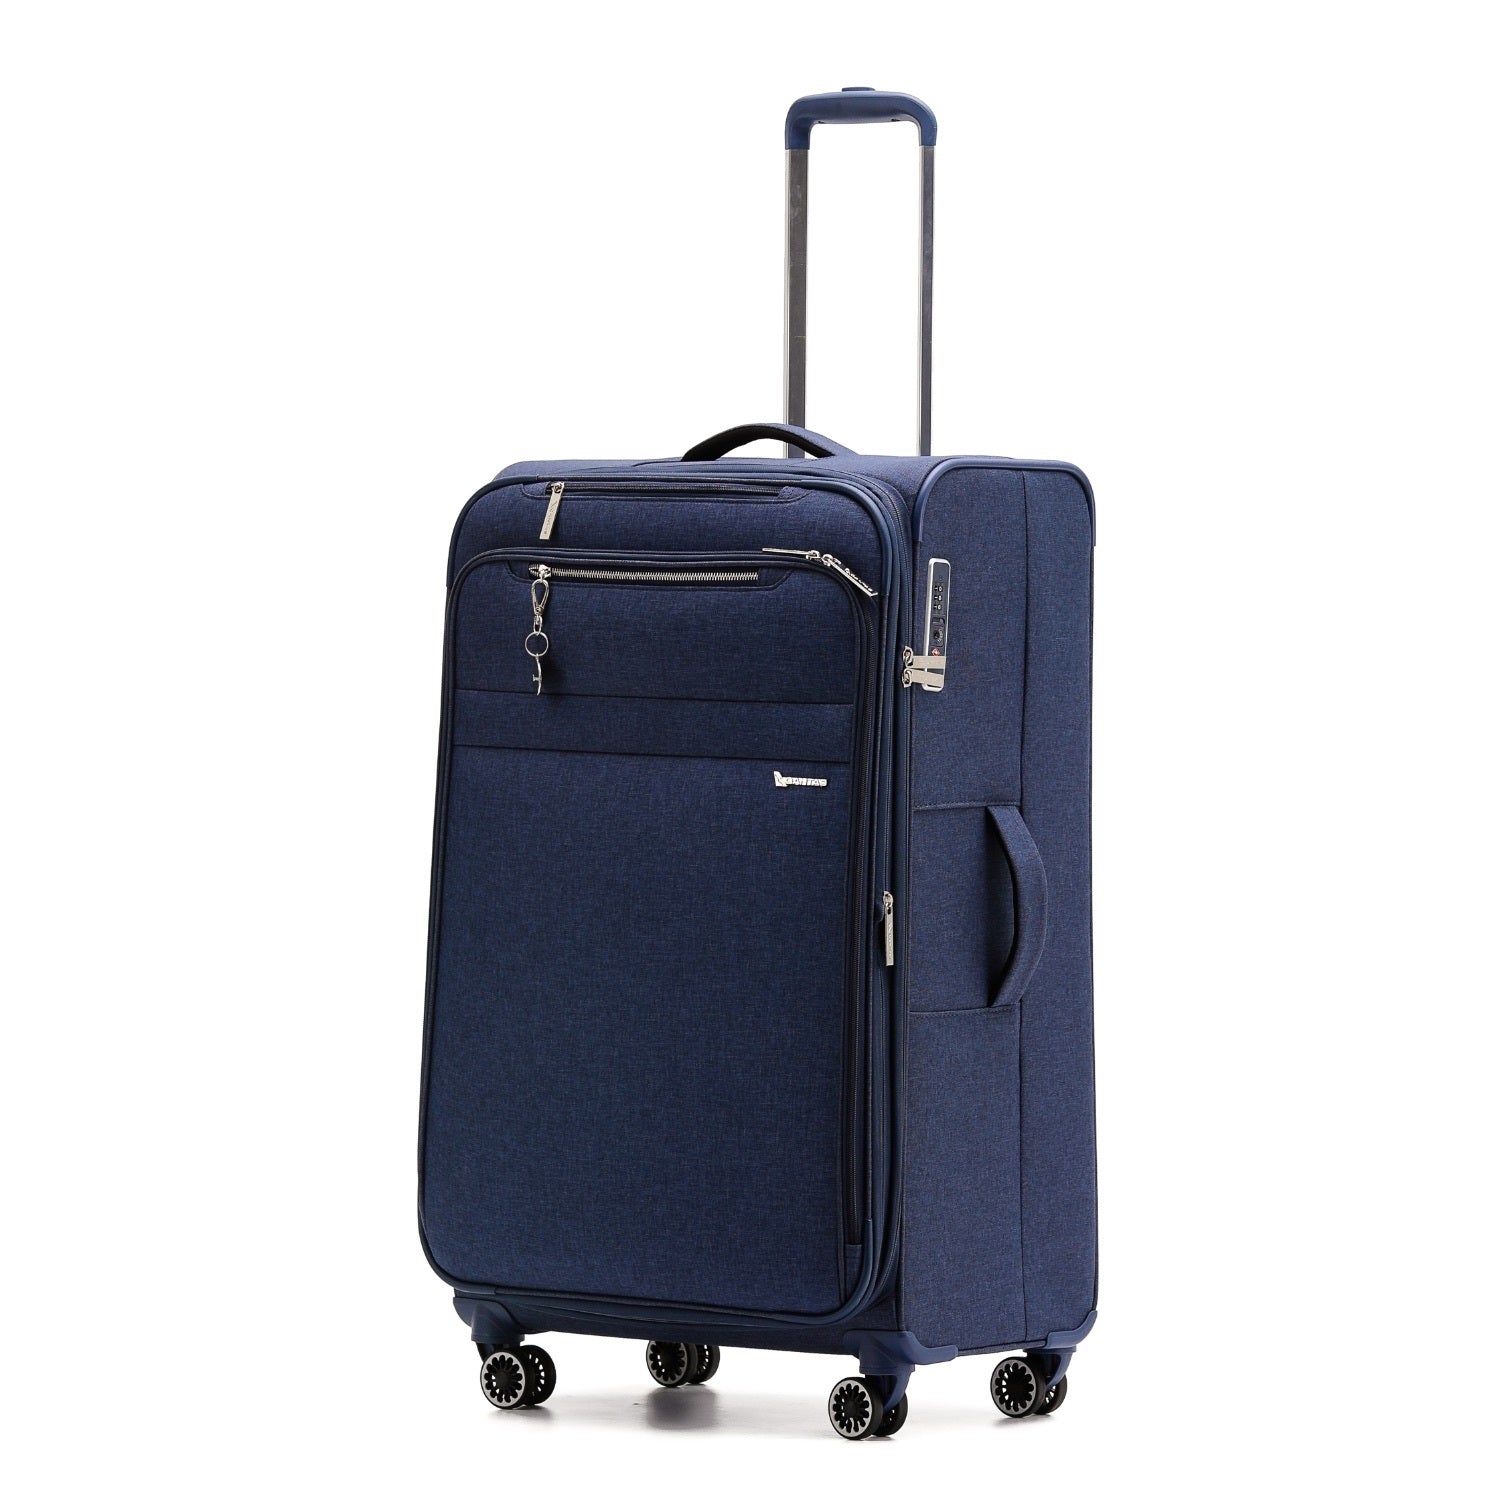 Qantas - QF400 81cm Large Adelaide Soft sided spinner - Navy-5